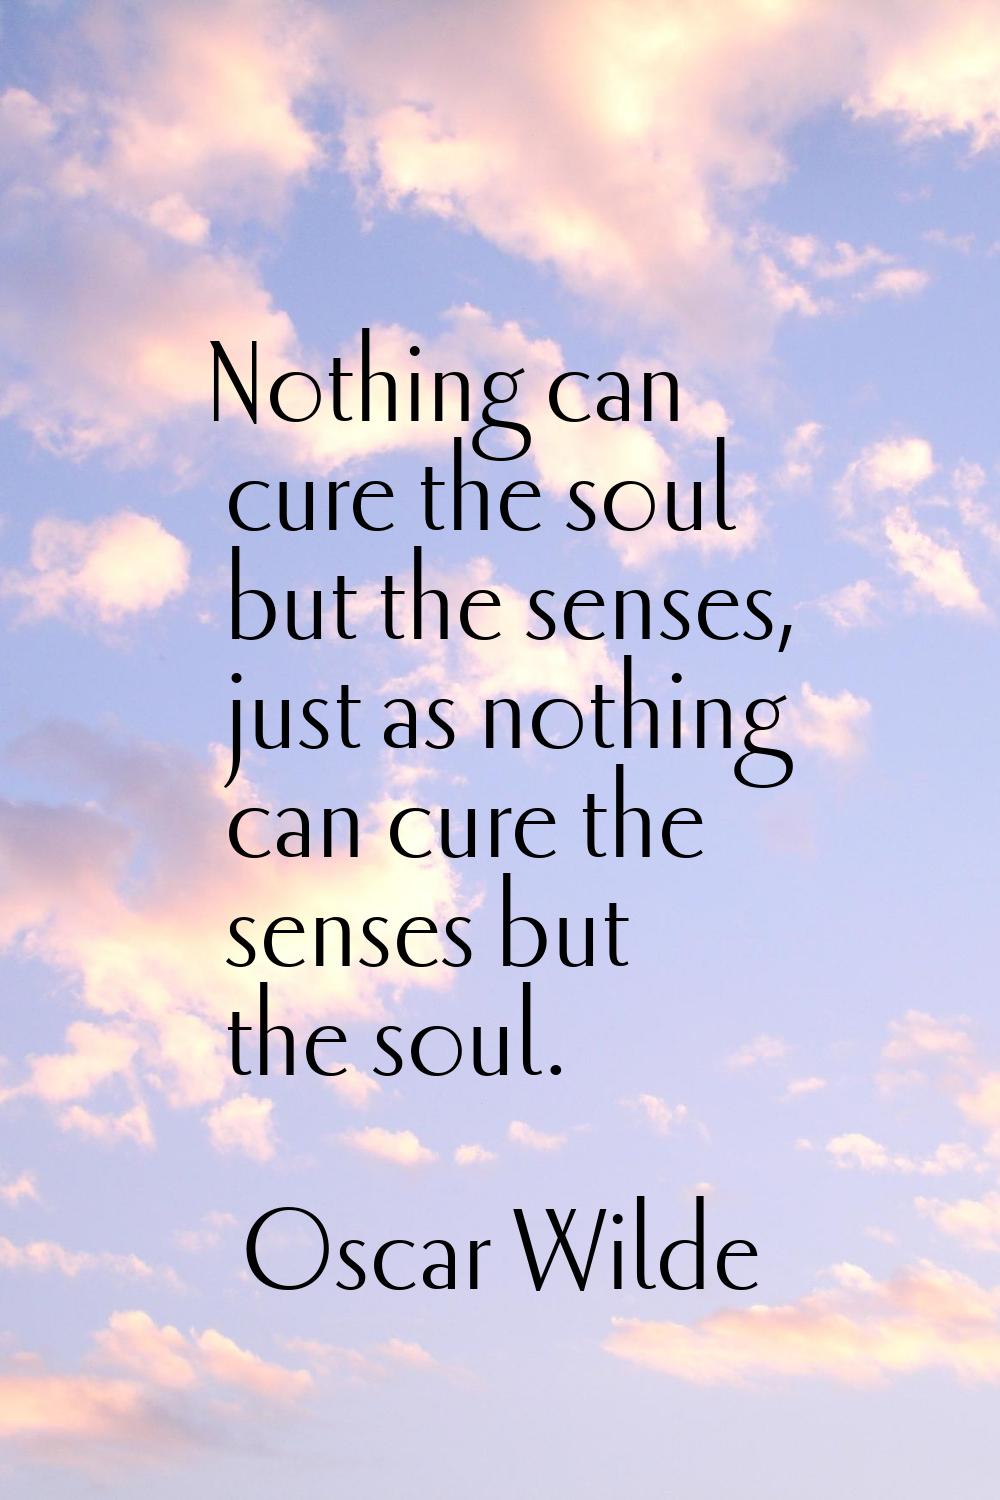 Nothing can cure the soul but the senses, just as nothing can cure the senses but the soul.